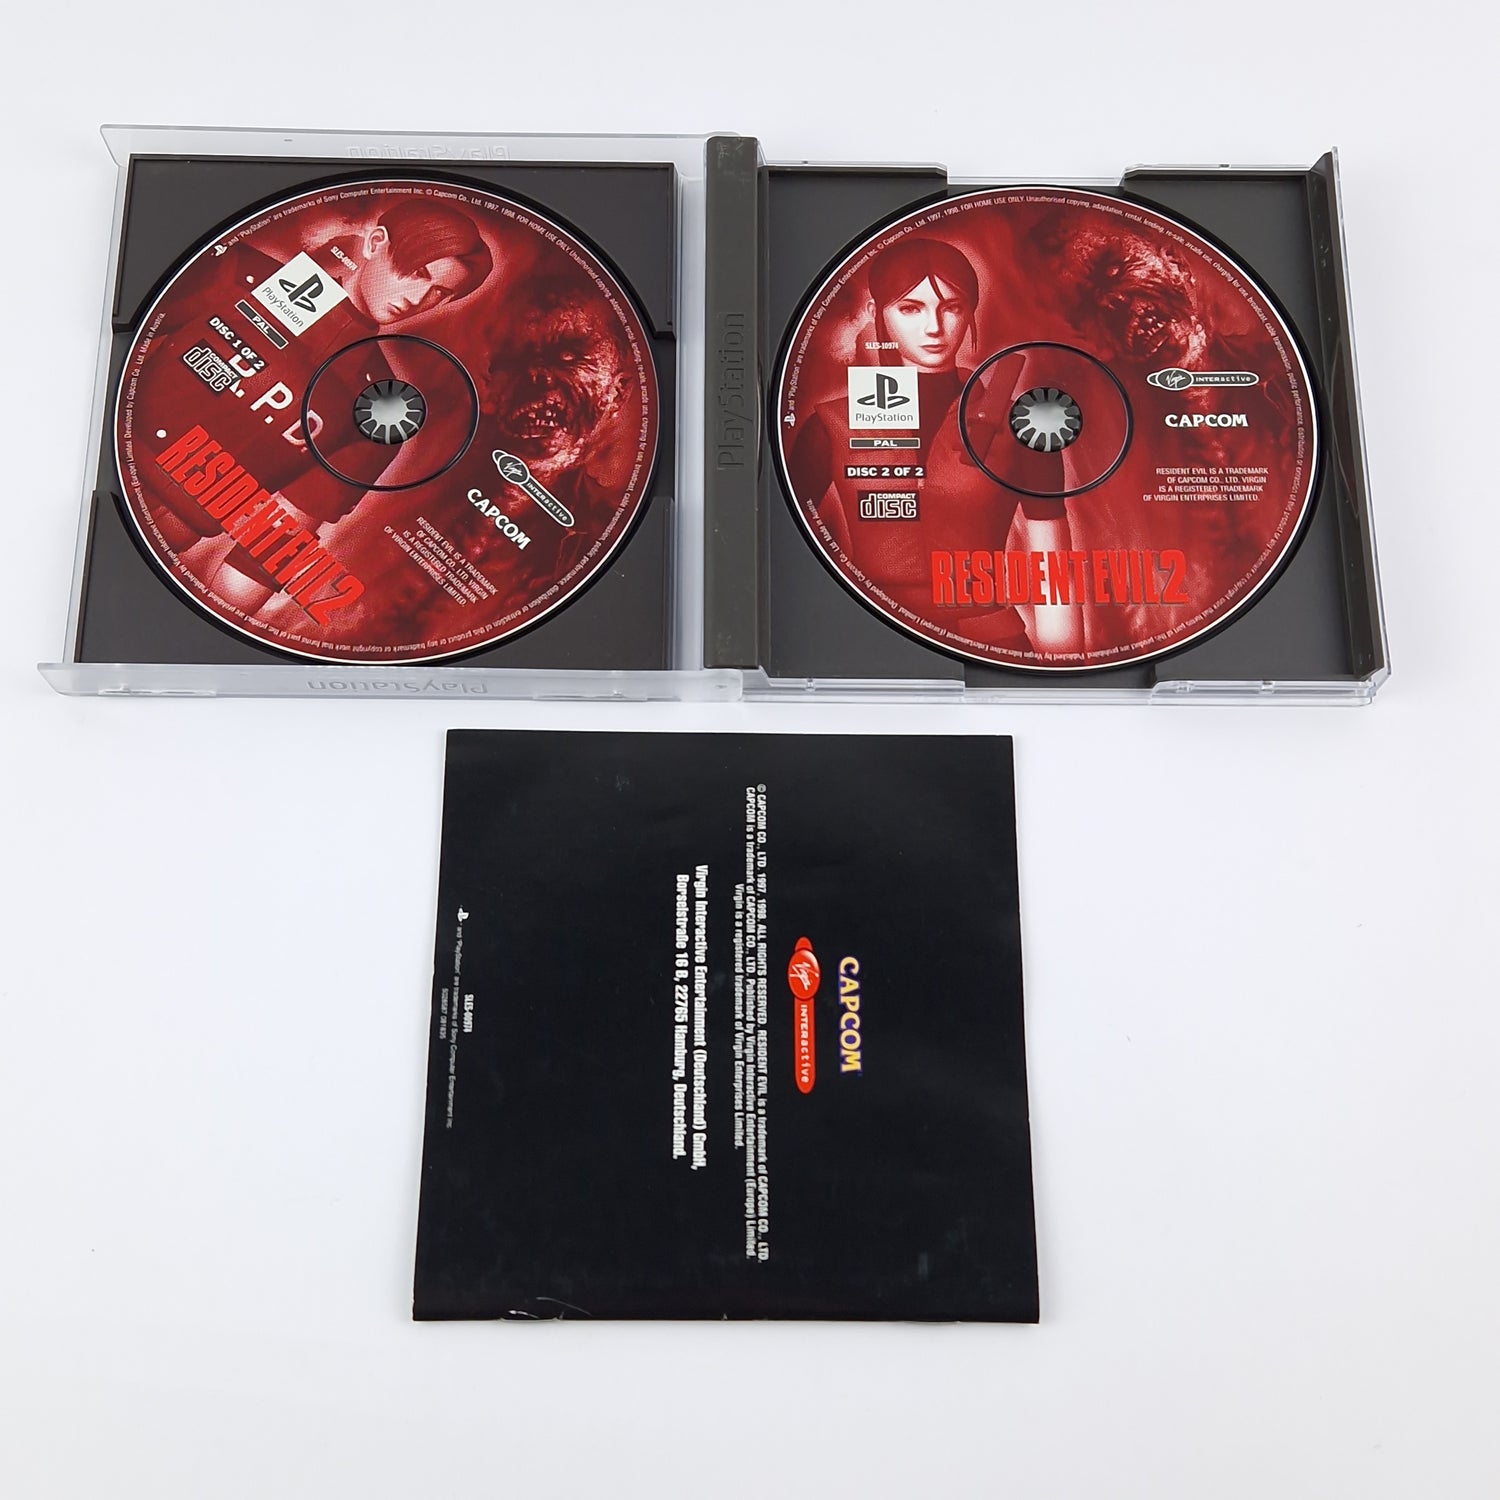 Sony Playstation 1 Spiel : Resident Evil 2 - OVP Anleitung CD PS1 PSX PAL USK18